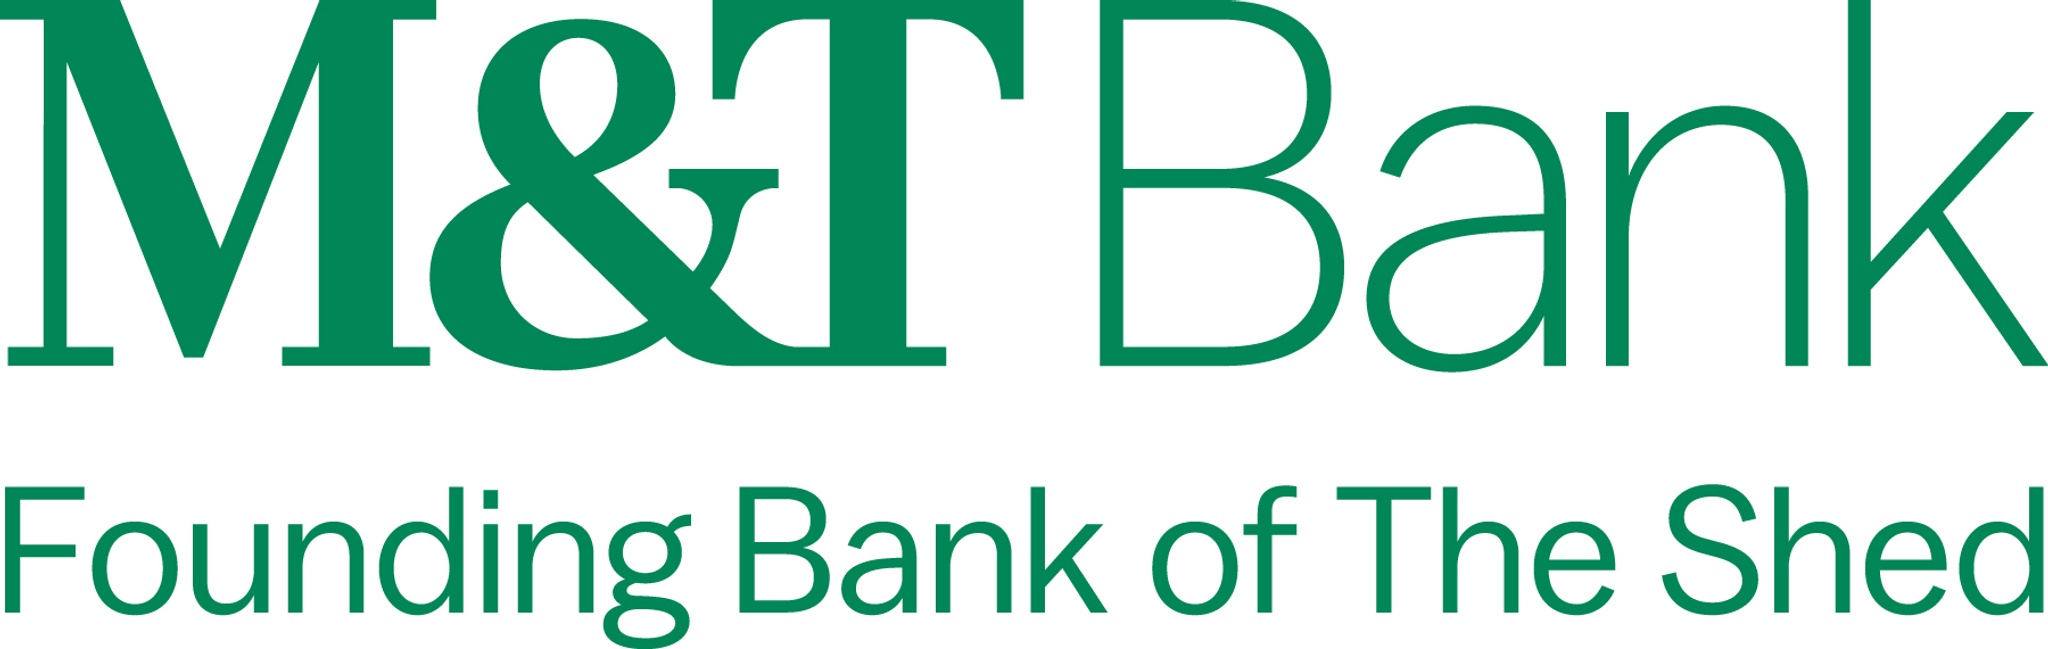 M&T Bank's logo with the green text: M&T Bank, Founding Bank of The Shed